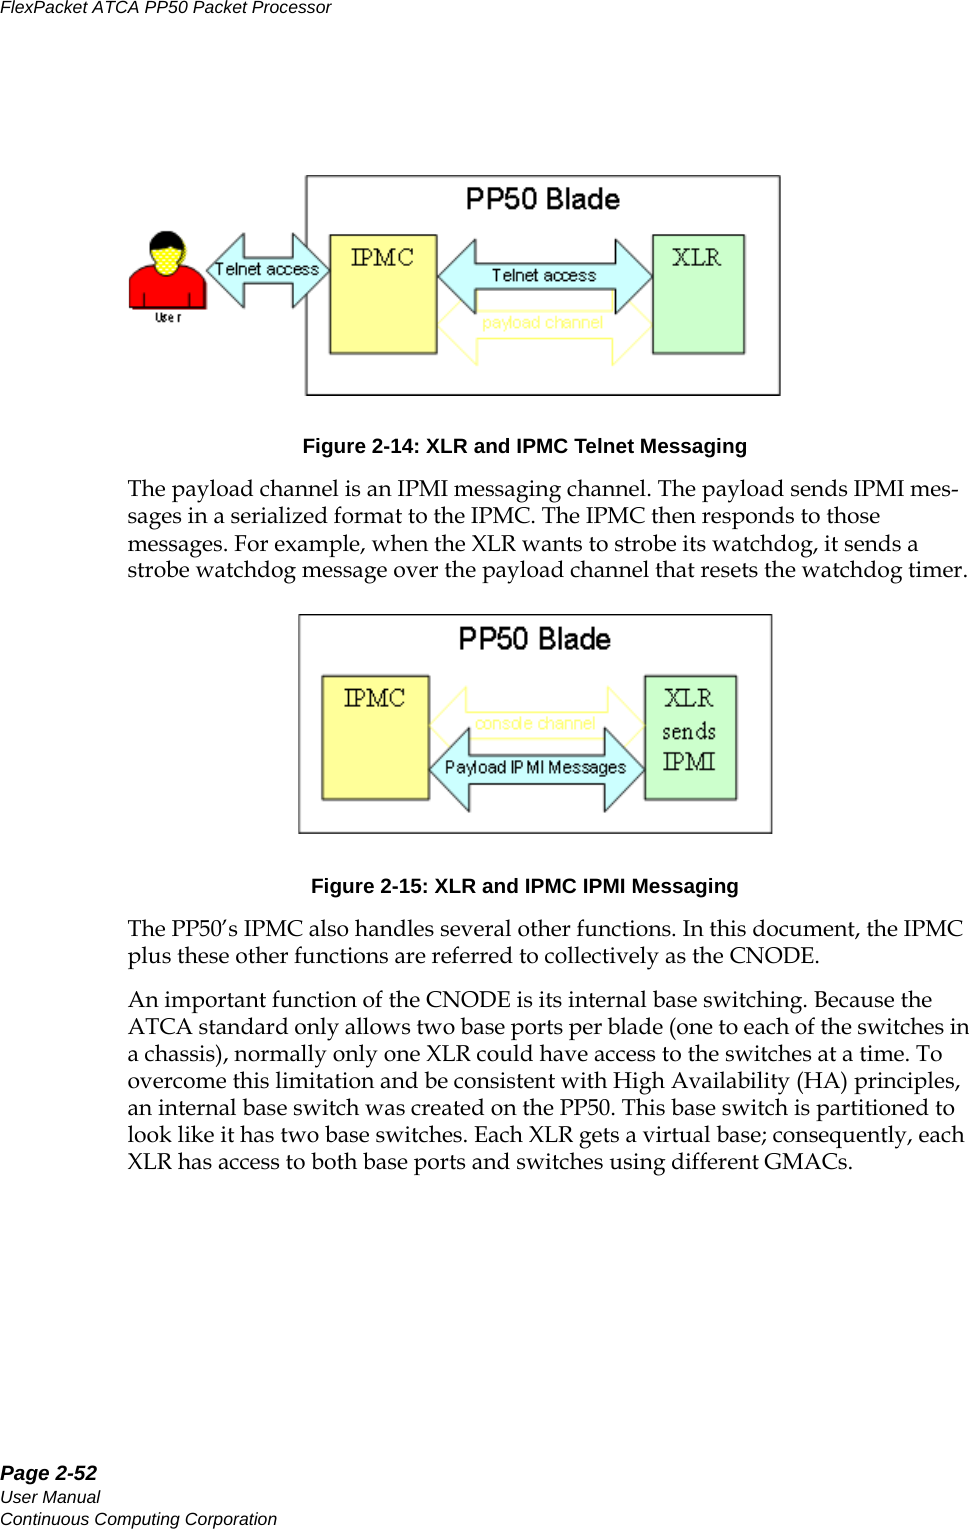 Page 2-52User ManualContinuous Computing CorporationFlexPacket ATCA PP50 Packet Processor     PreliminaryFigure 2-14: XLR and IPMC Telnet MessagingThe payload channel is an IPMI messaging channel. The payload sends IPMI mes-sages in a serialized format to the IPMC. The IPMC then responds to those messages. For example, when the XLR wants to strobe its watchdog, it sends a strobe watchdog message over the payload channel that resets the watchdog timer. Figure 2-15: XLR and IPMC IPMI MessagingThe PP50’s IPMC also handles several other functions. In this document, the IPMC plus these other functions are referred to collectively as the CNODE. An important function of the CNODE is its internal base switching. Because the ATCA standard only allows two base ports per blade (one to each of the switches in a chassis), normally only one XLR could have access to the switches at a time. To overcome this limitation and be consistent with High Availability (HA) principles, an internal base switch was created on the PP50. This base switch is partitioned to look like it has two base switches. Each XLR gets a virtual base; consequently, each XLR has access to both base ports and switches using different GMACs. 